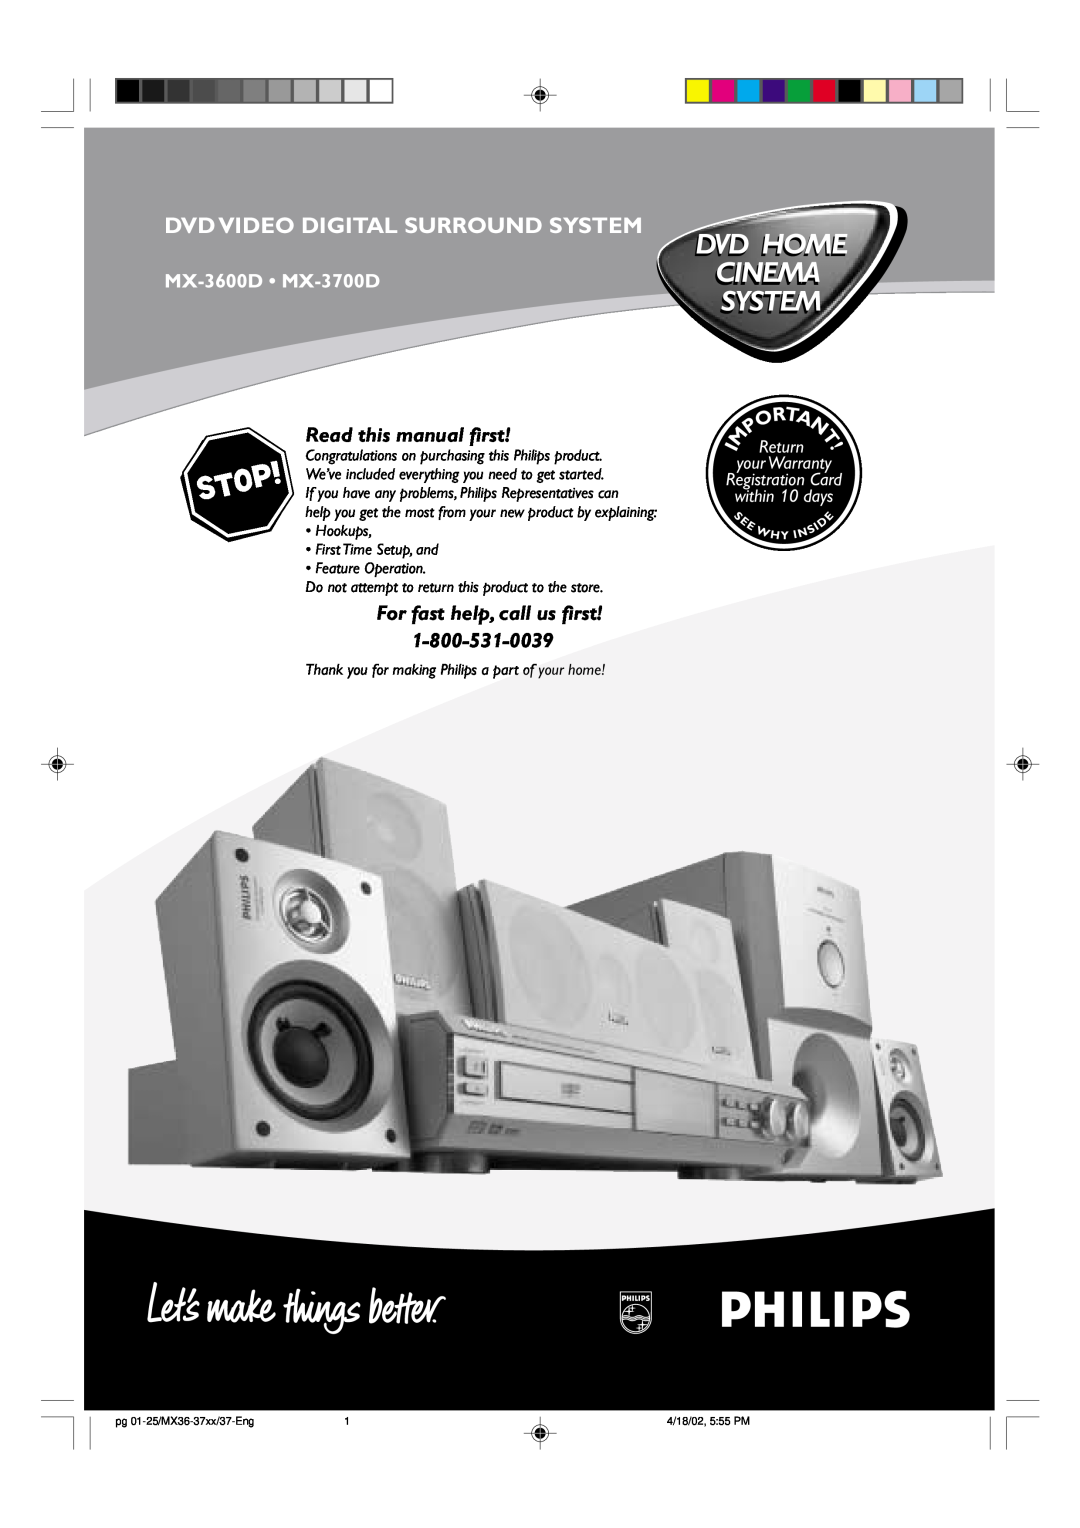 Philips MX-3700D warranty Dvd Video Digital Surround System, Read this manual ﬁrst, For fast help, call us ﬁrst, Return 